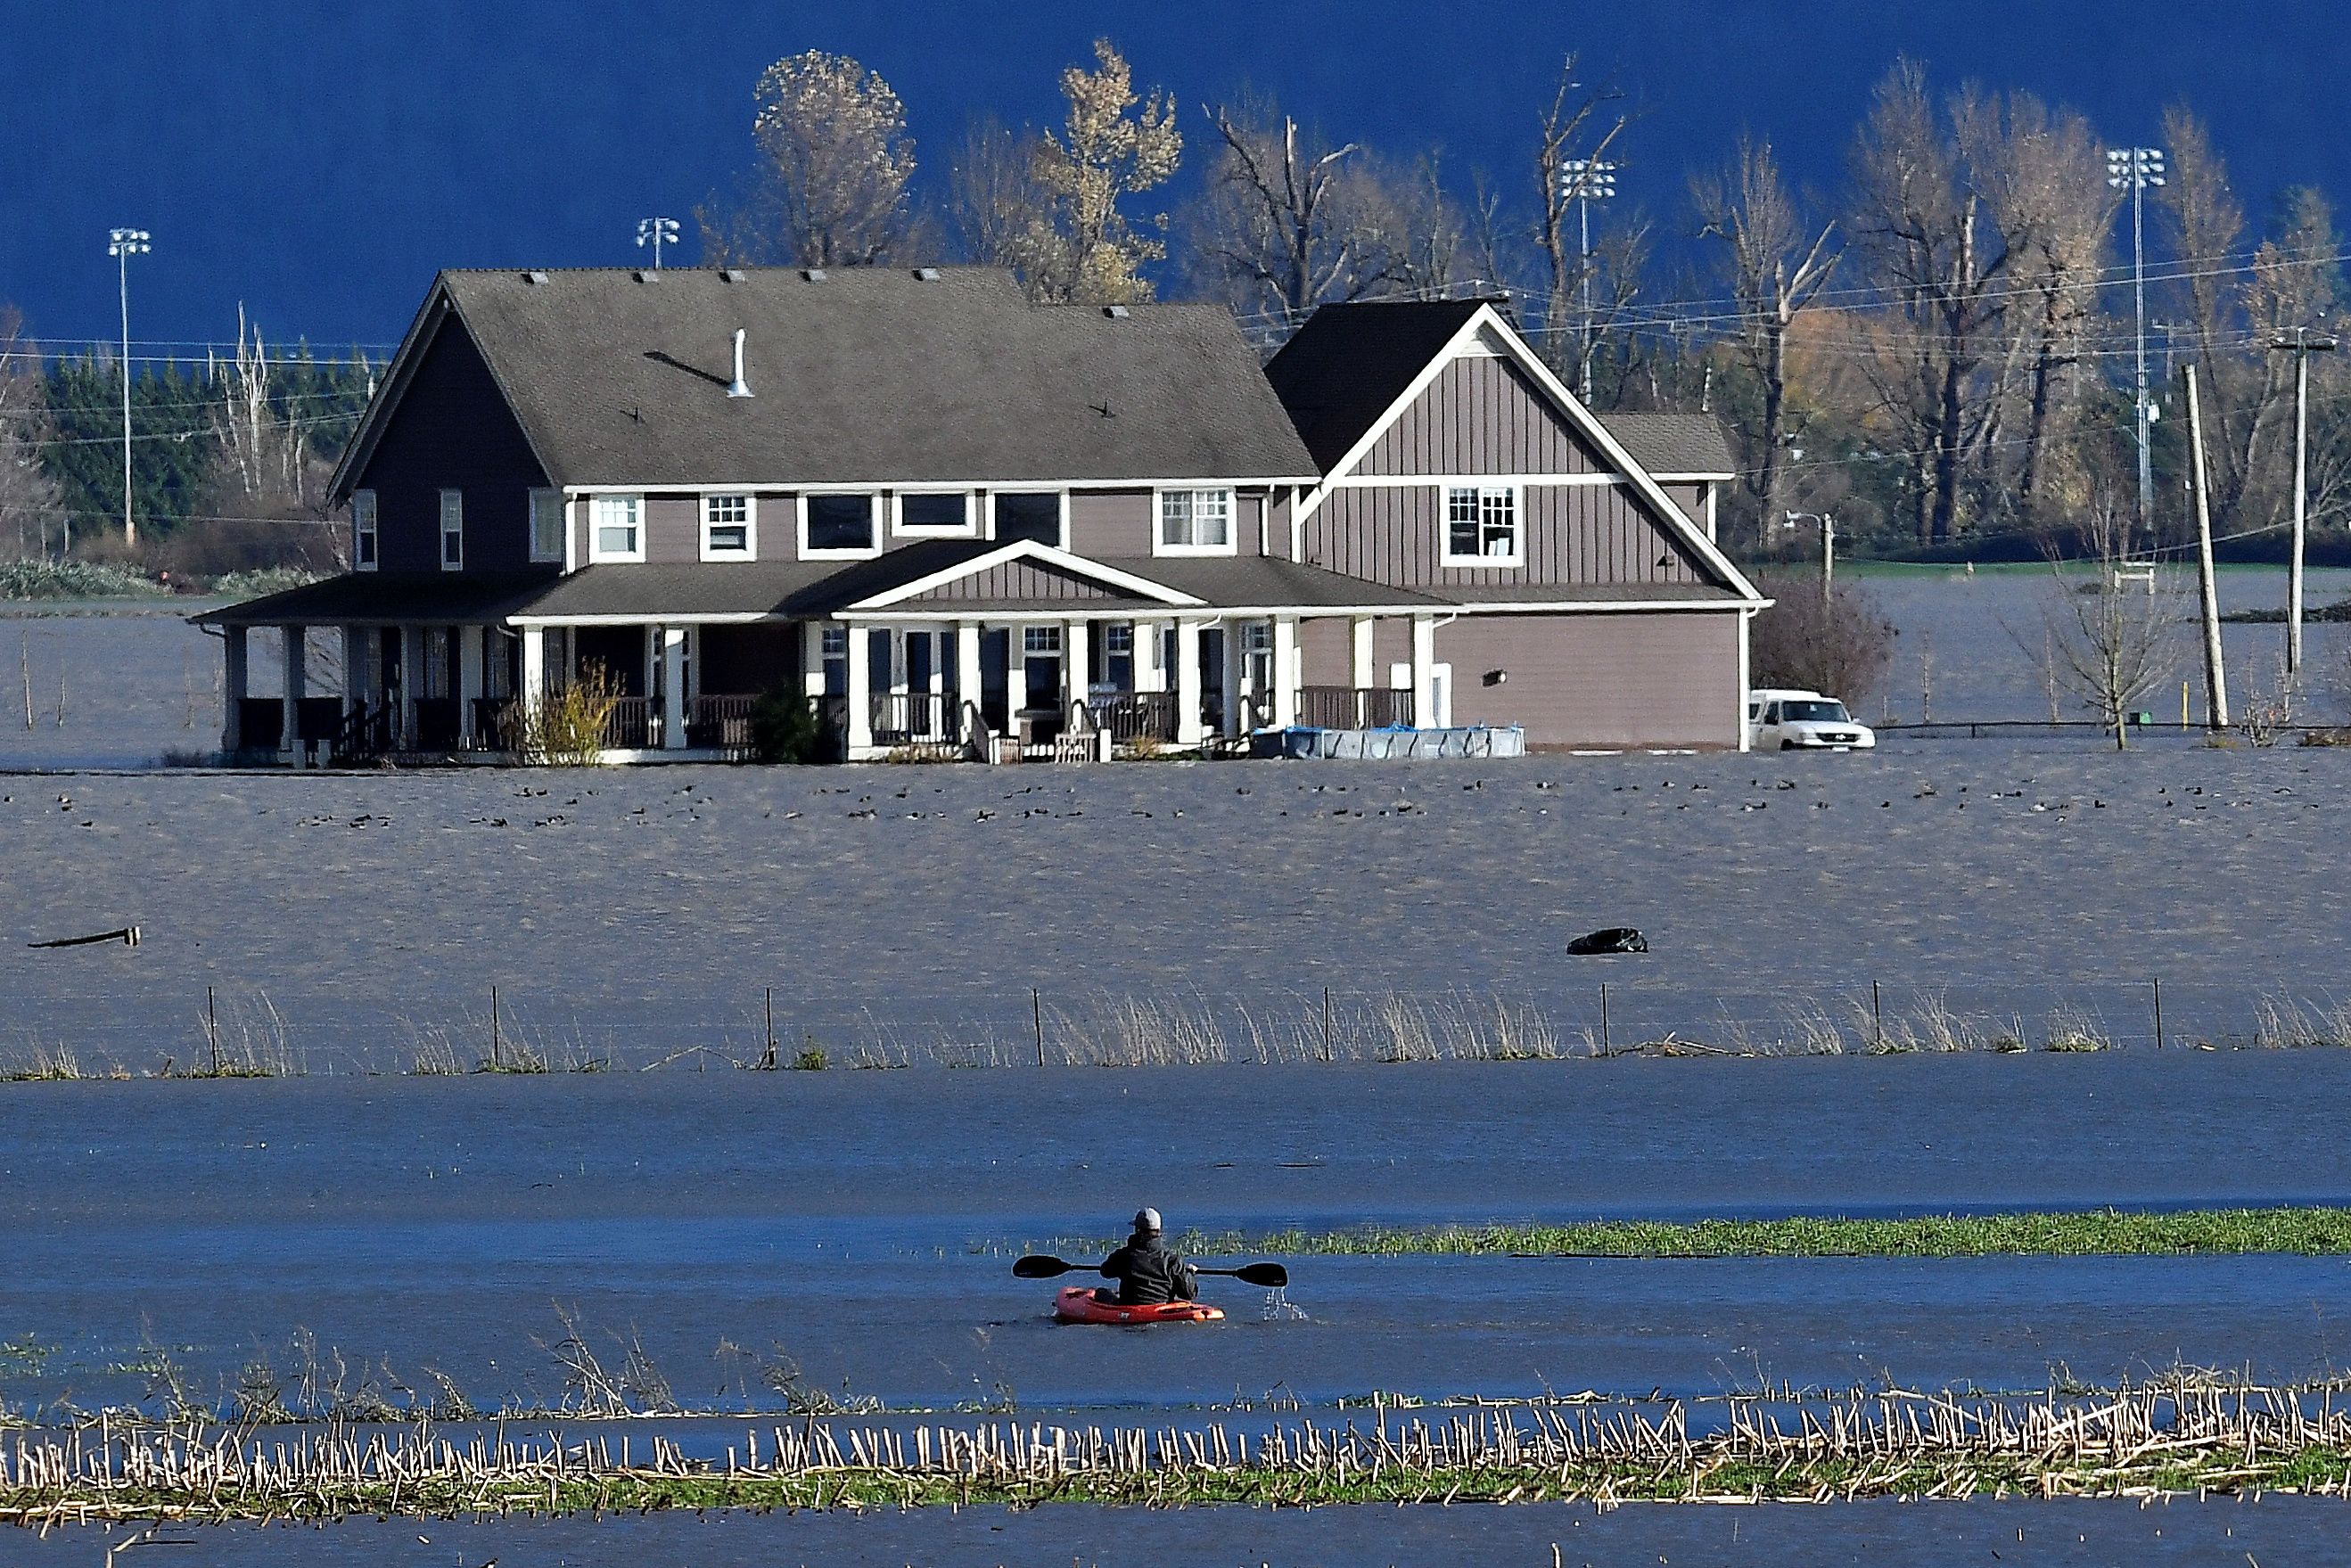 Rainstorms lash the western Canadian province of British Columbia